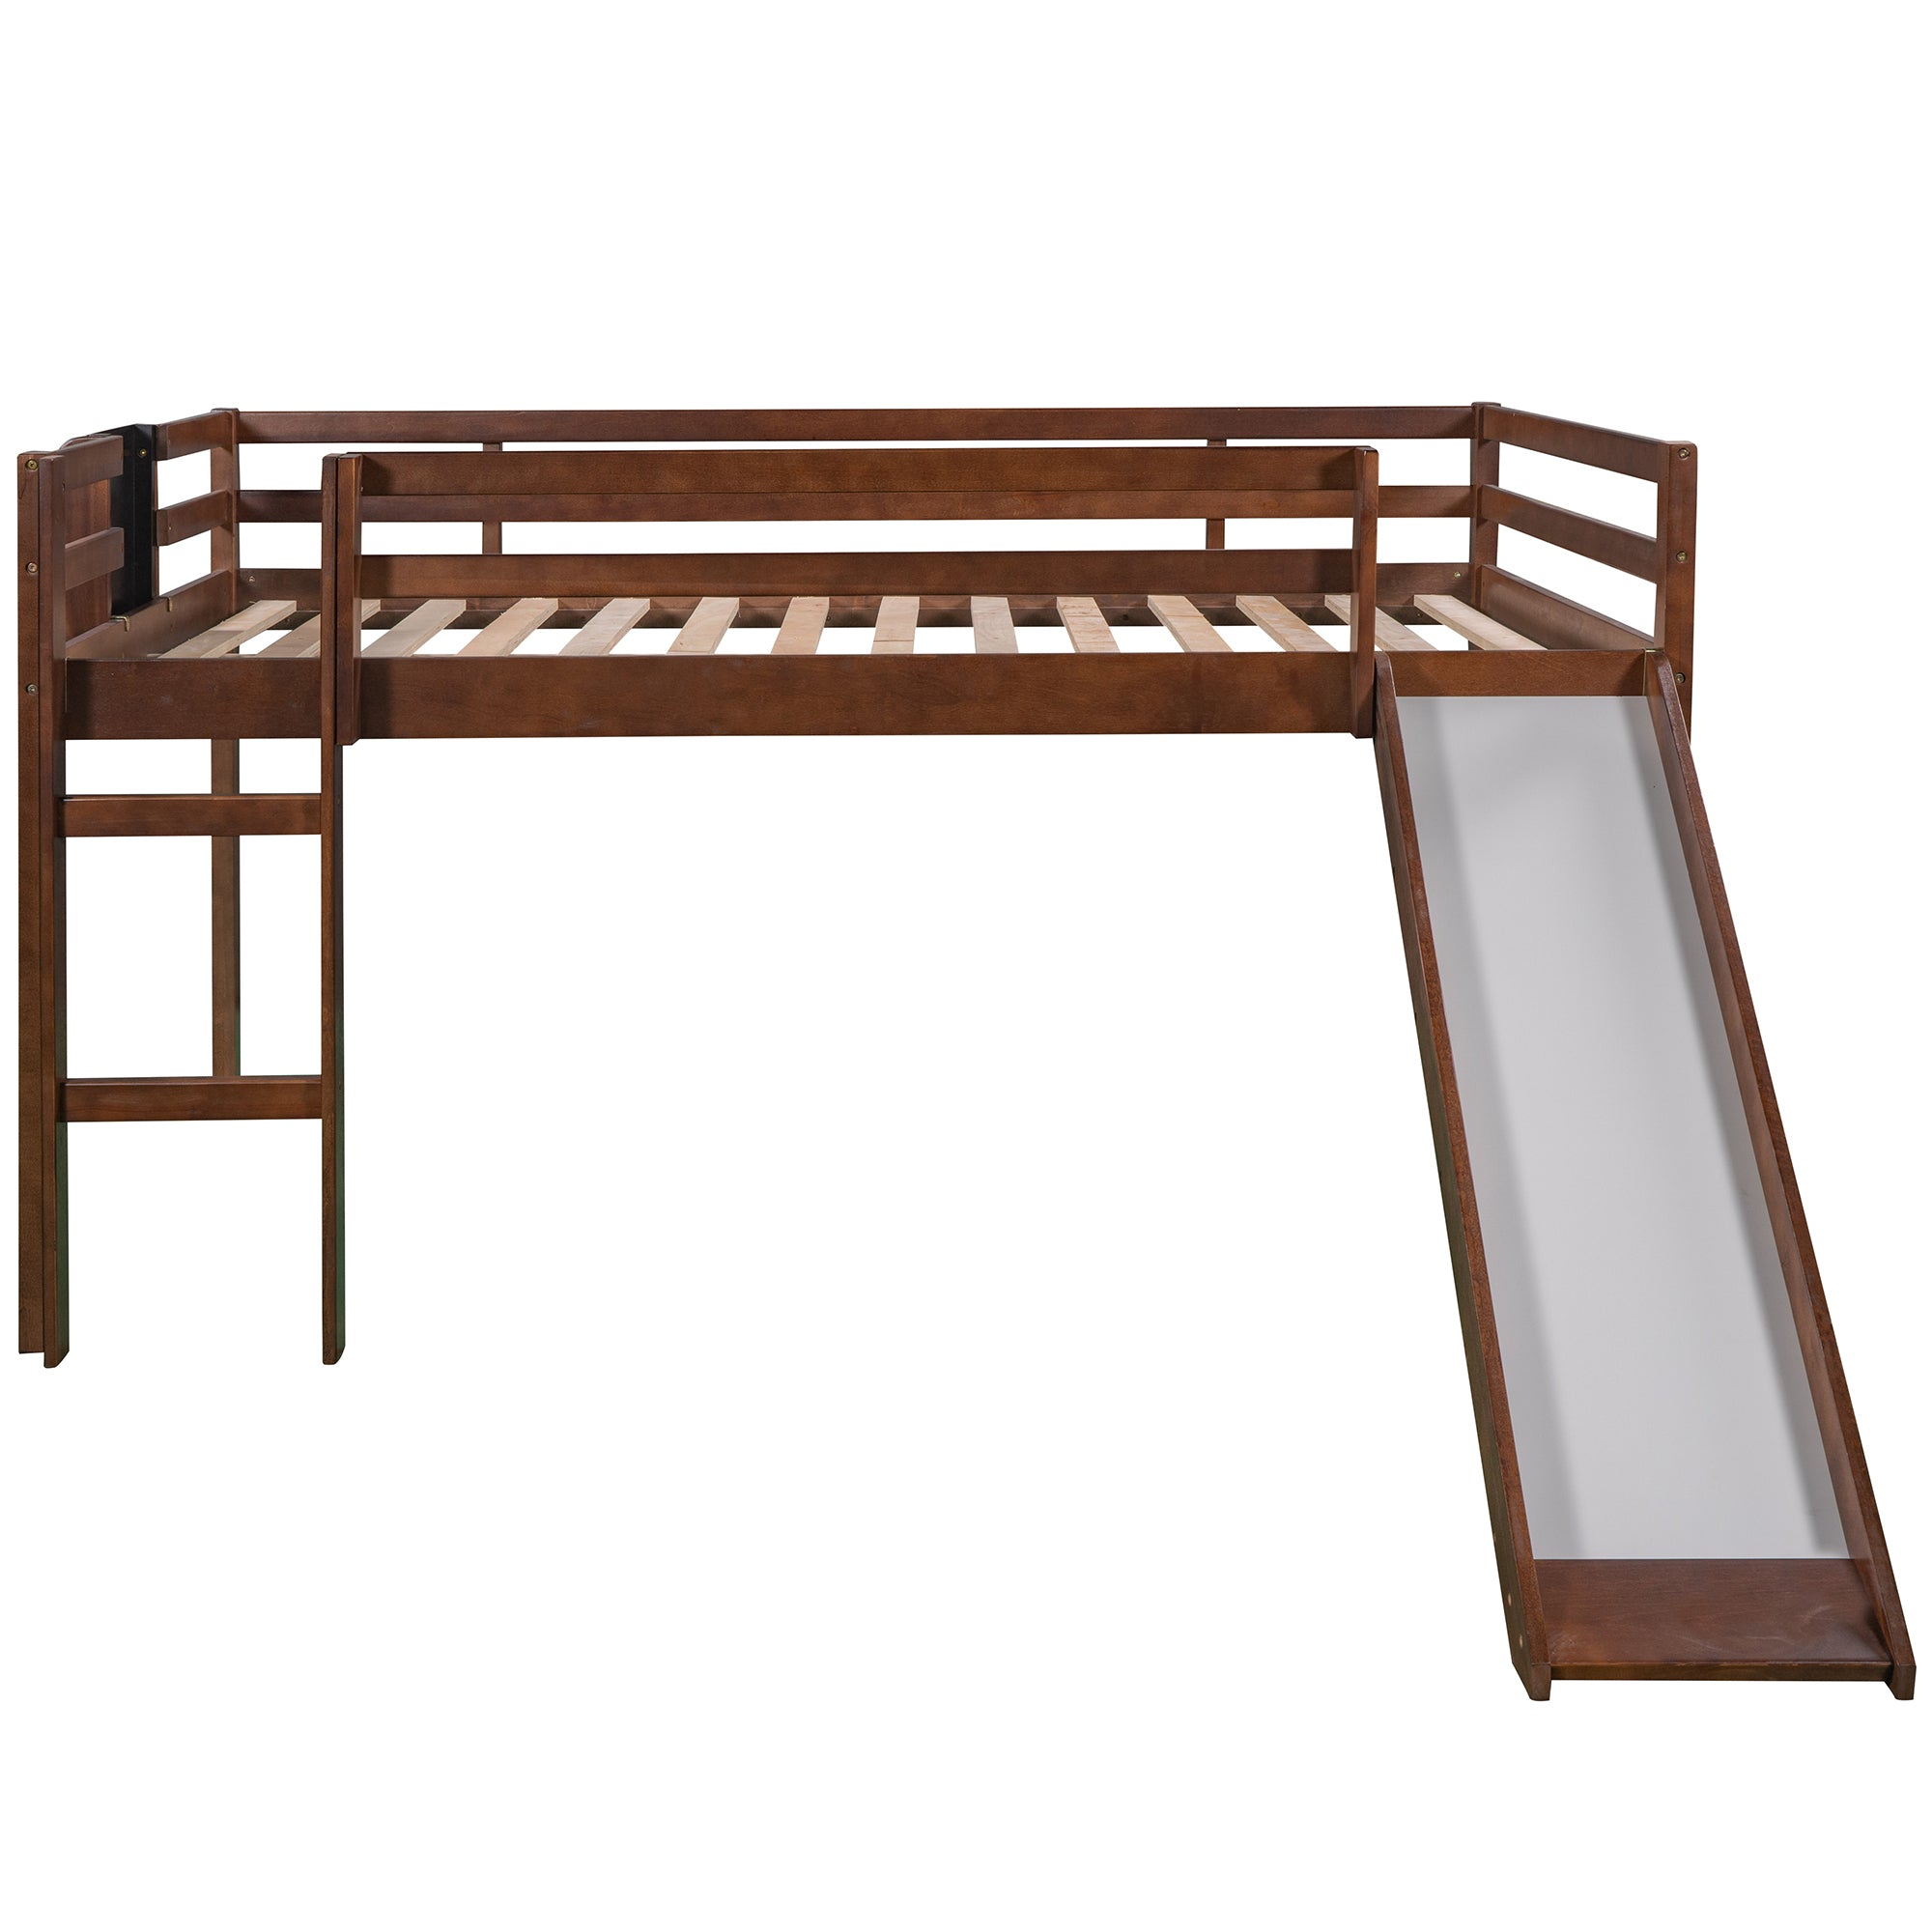 Full size Loft Bed Wood Bed with Slide (Walnut)